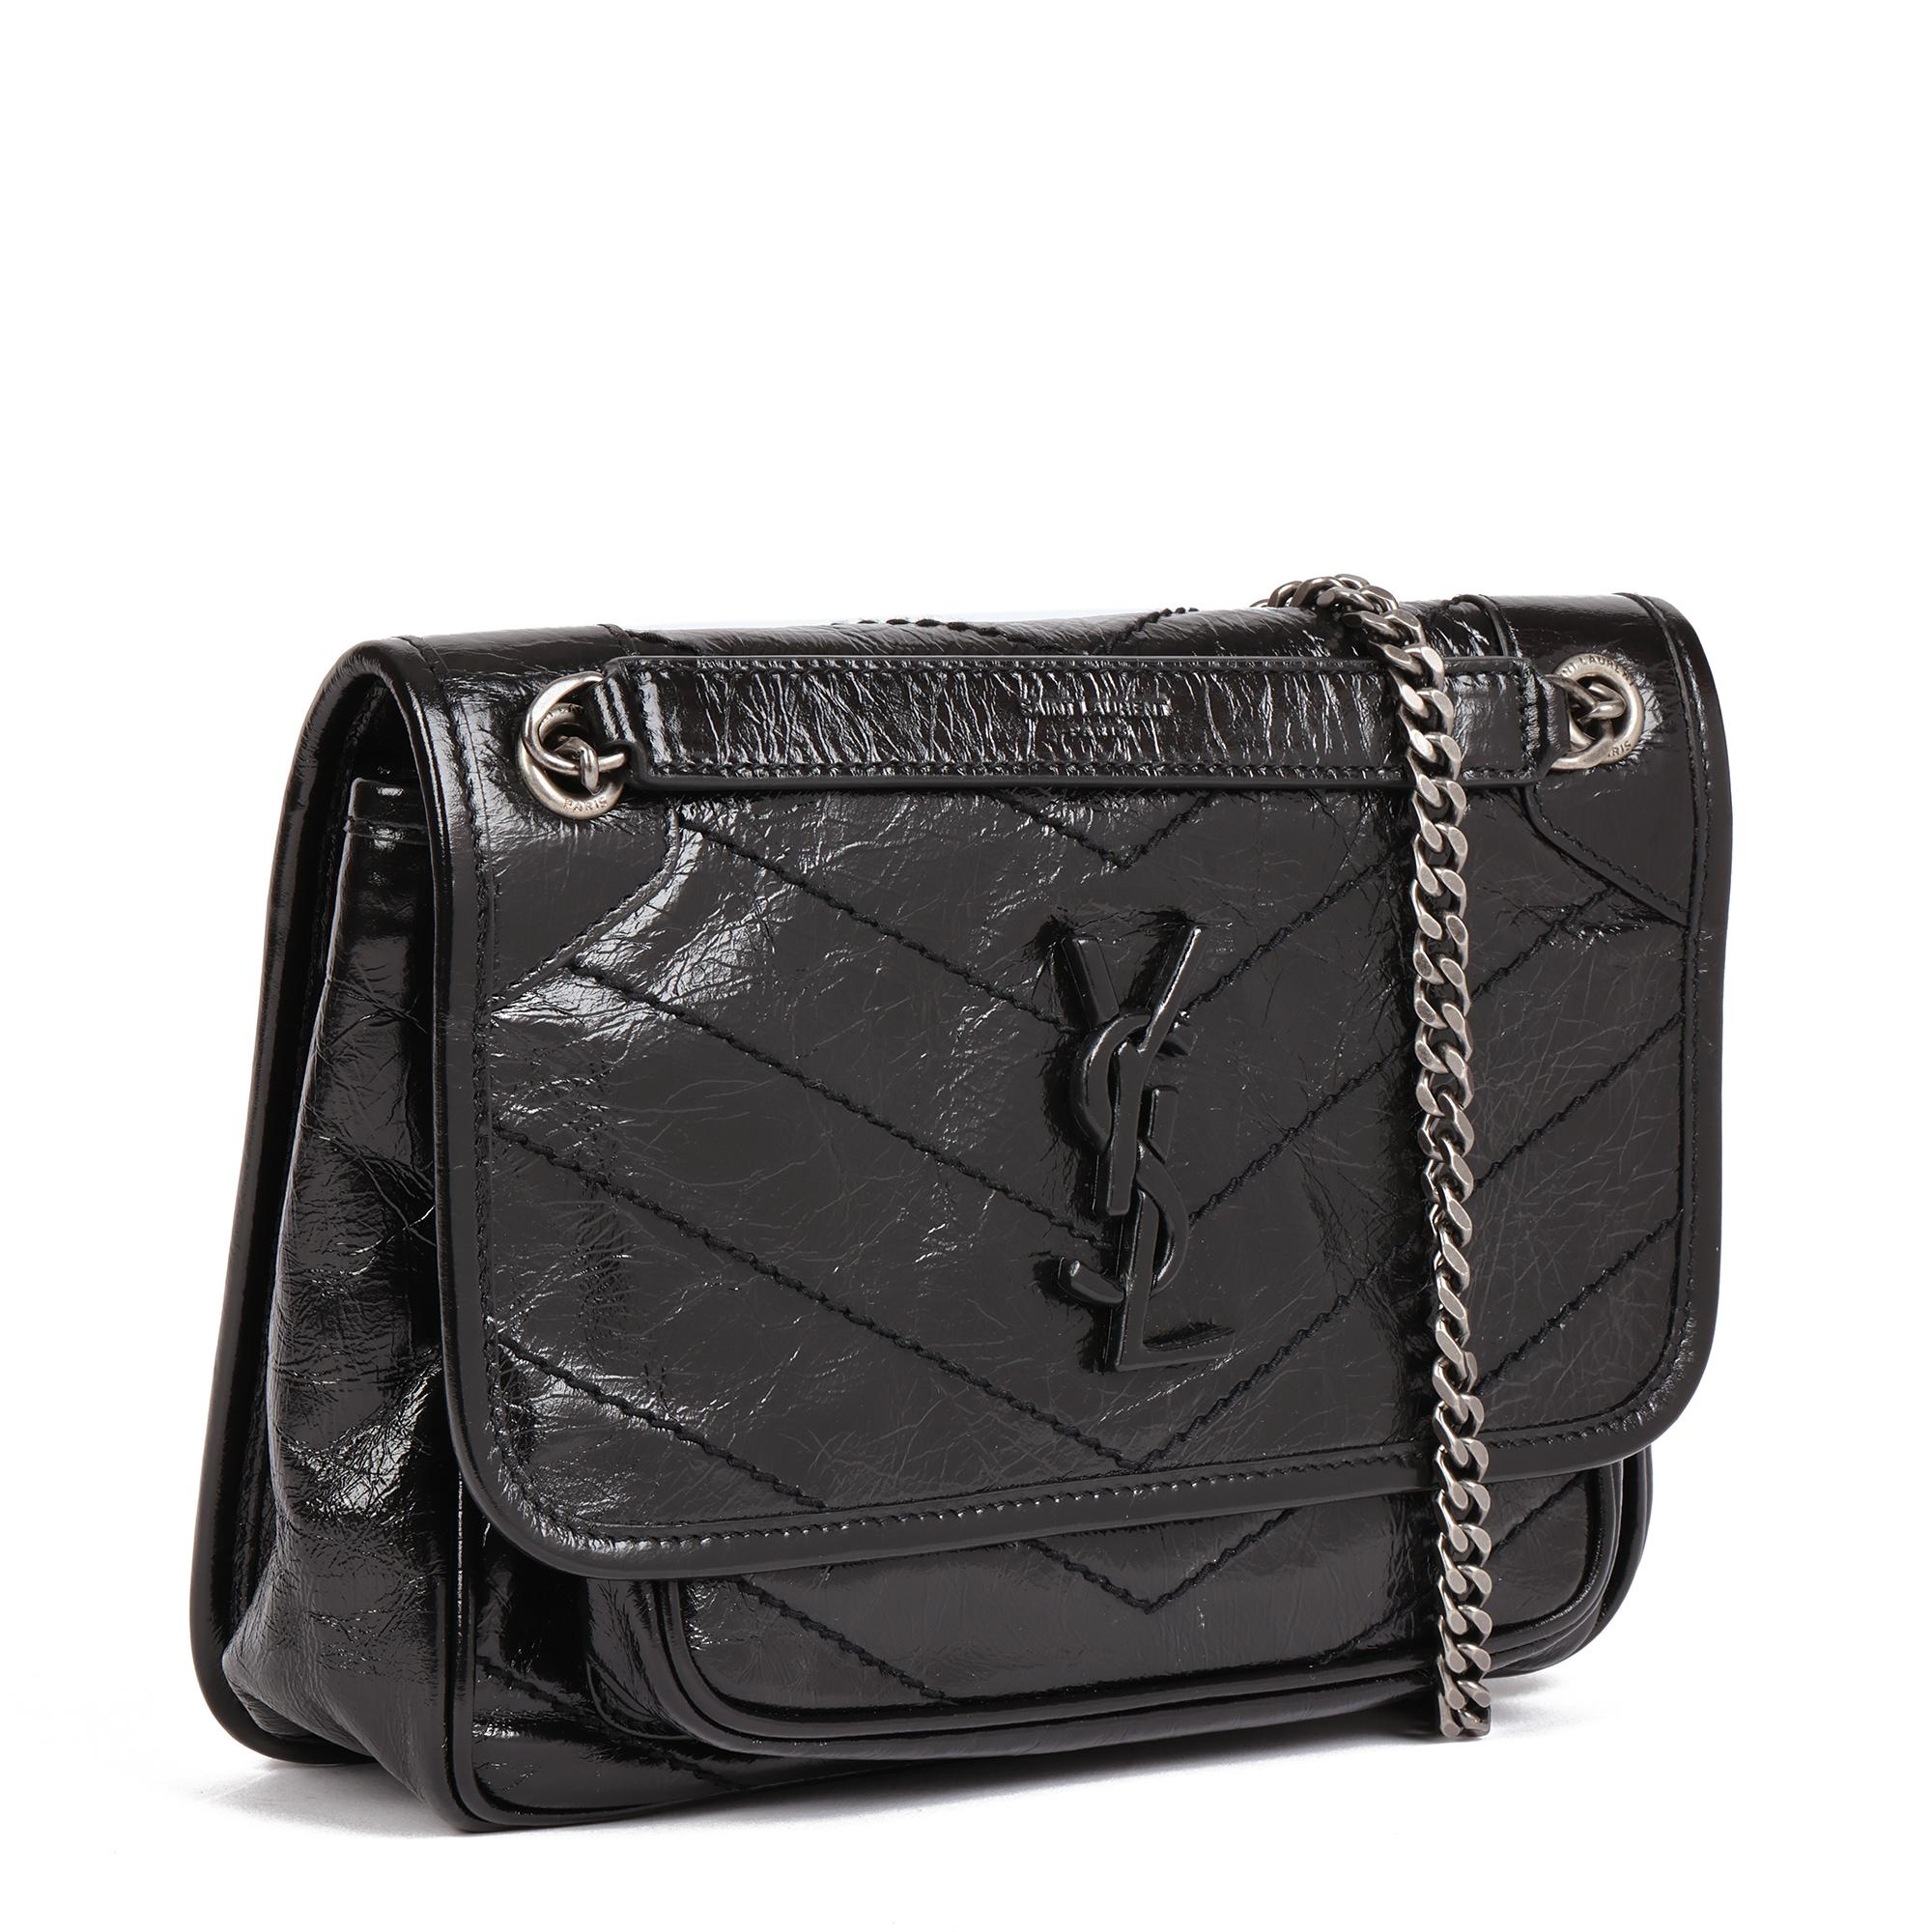 SAINT LAURENT
Black Chevron Quilted Crinkled Calfskin Leather Baby Niki

Xupes Reference: HB4637
Serial Number: X
Age (Circa): 2019
Accompanied By: Saint Laurent Dust Bag, Care Booklet
Authenticity Details: Date Stamp (Made in Italy)
Gender: